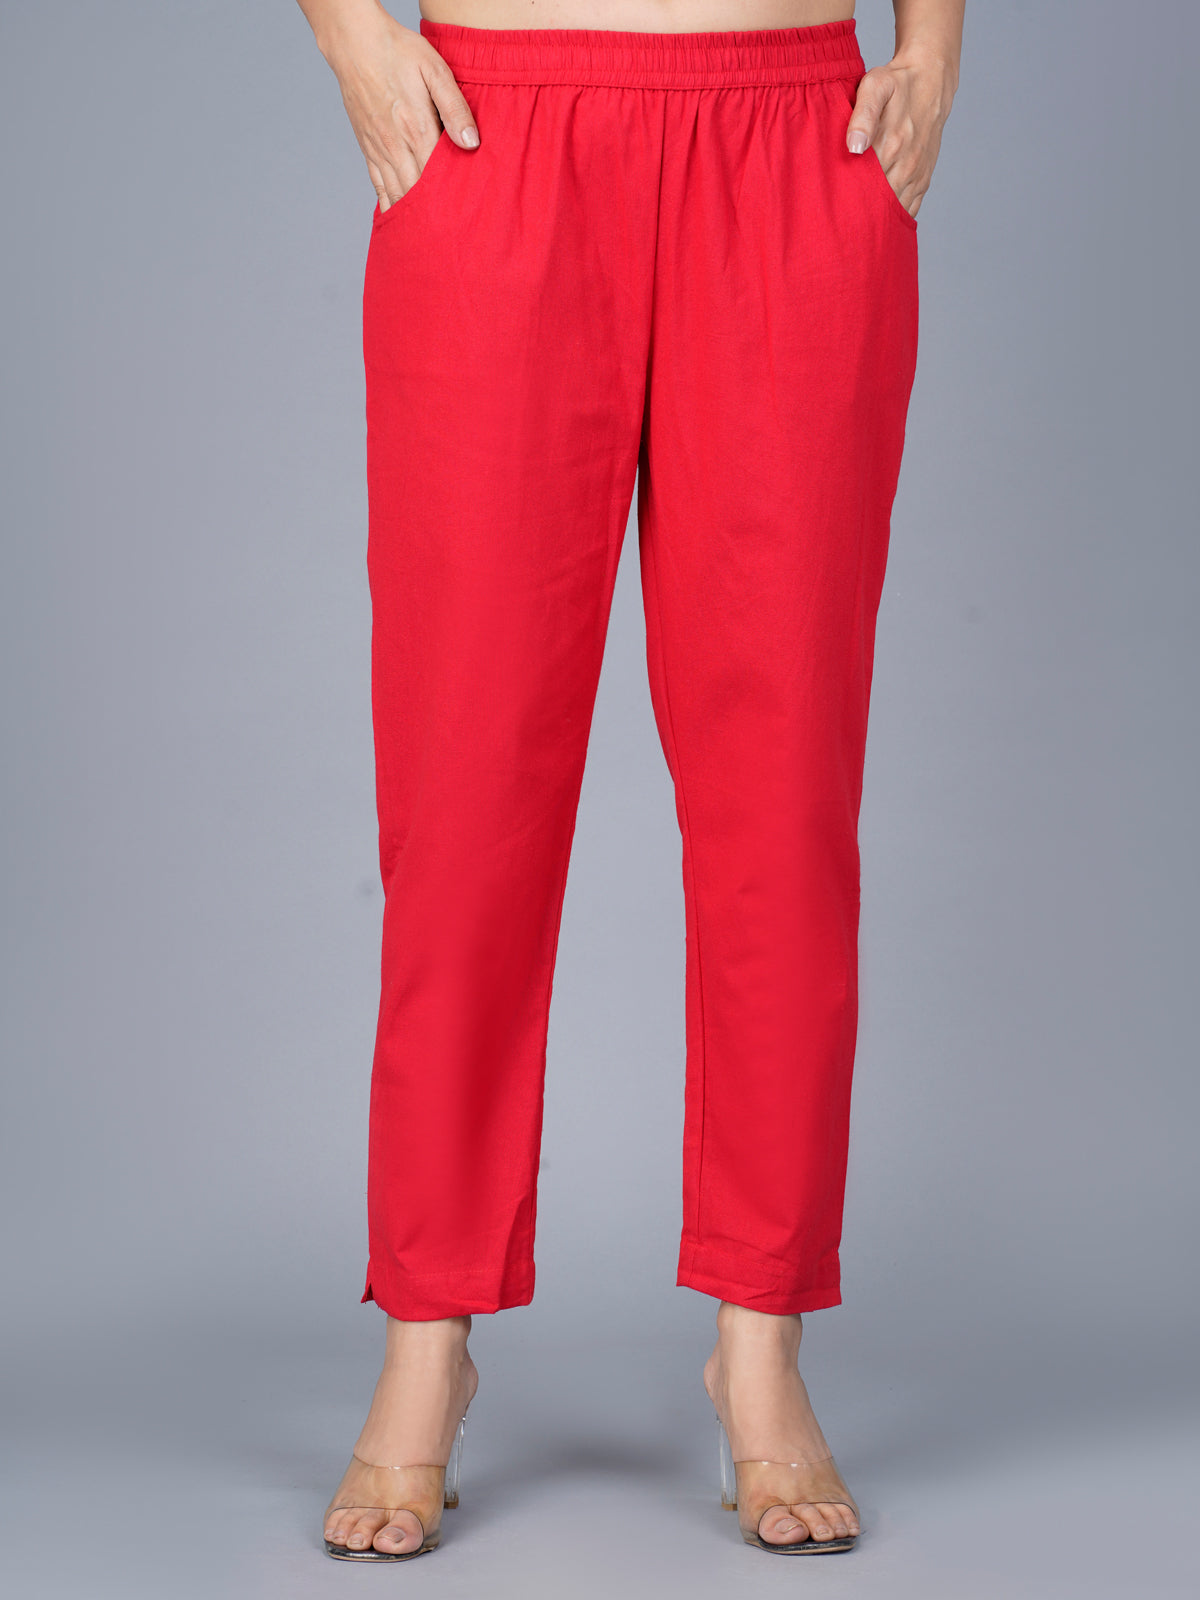 Pack Of 2 Womens Regular Fit Mustard And Red Fully Elastic Waistband Cotton Trouser